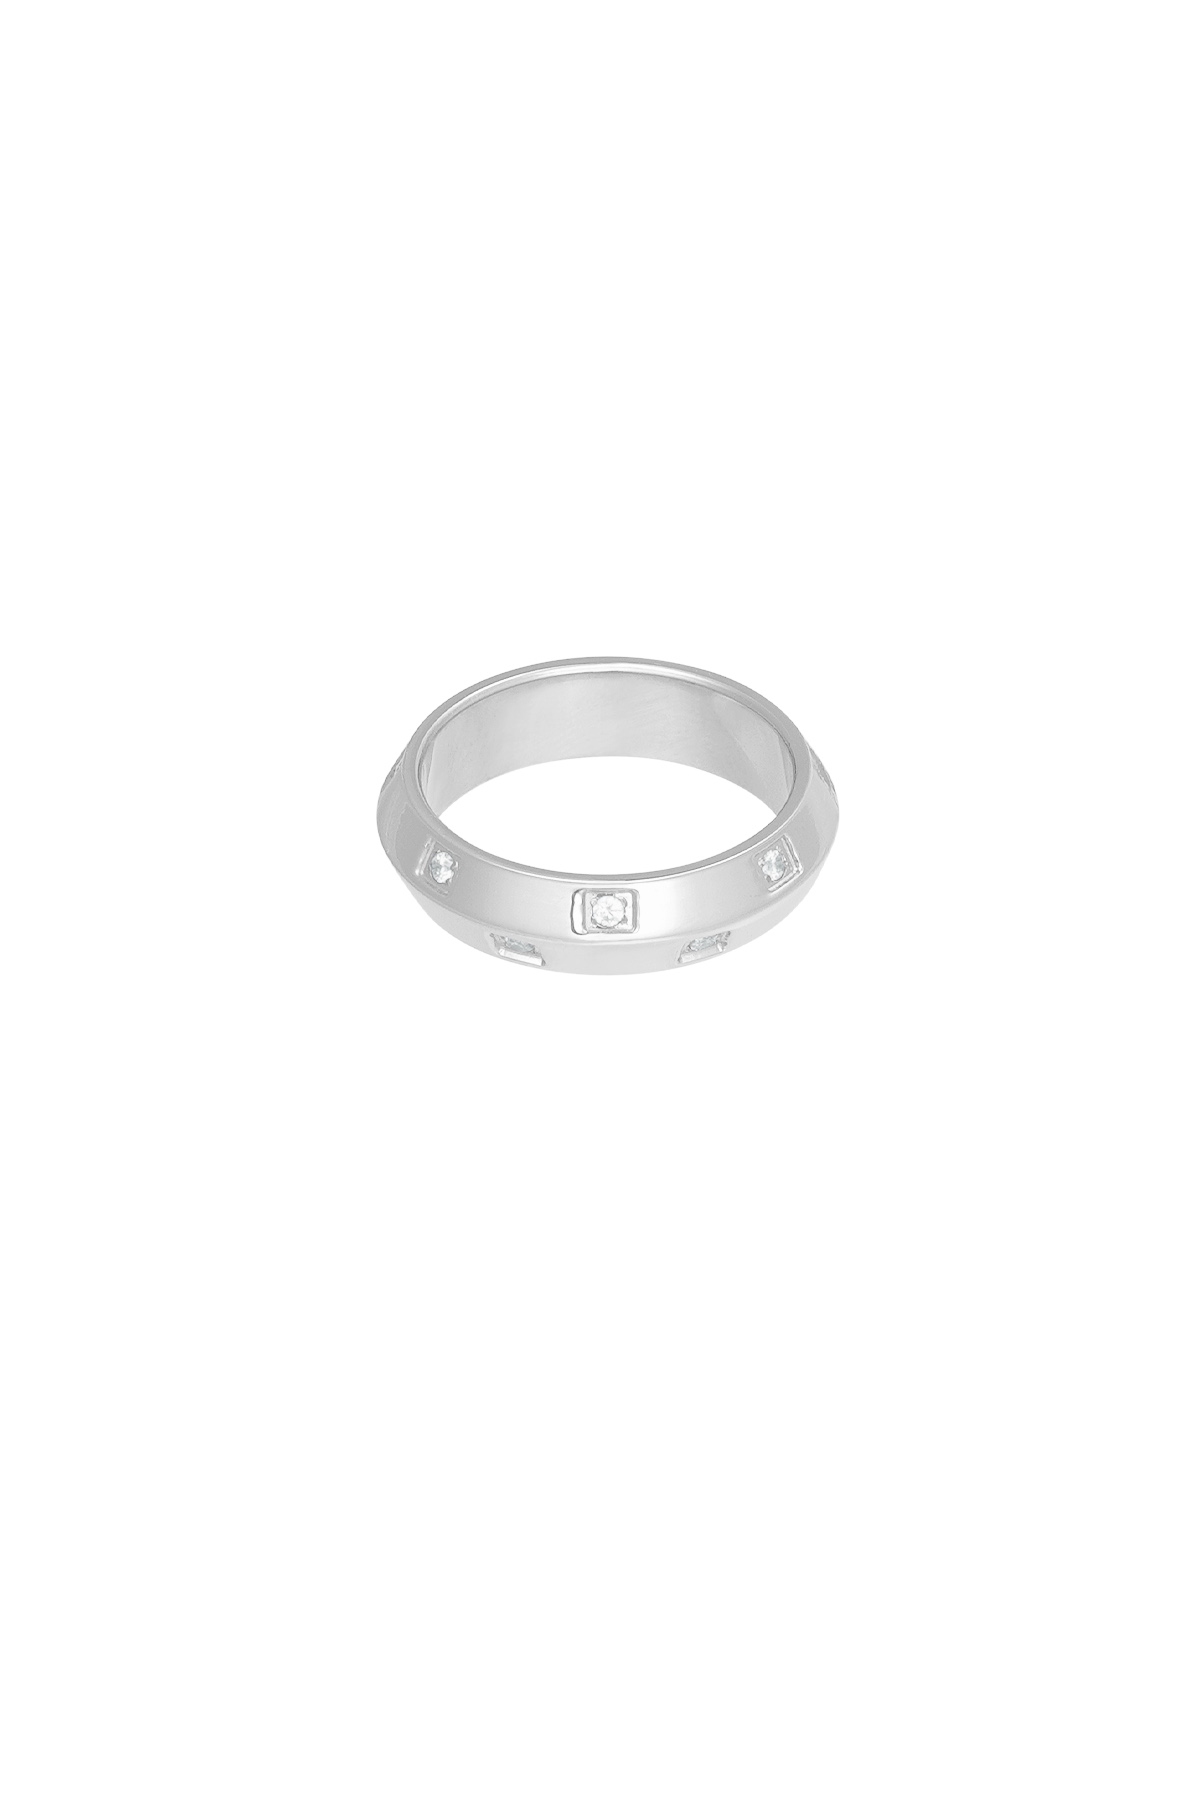 Ring aesthetic stones - silver